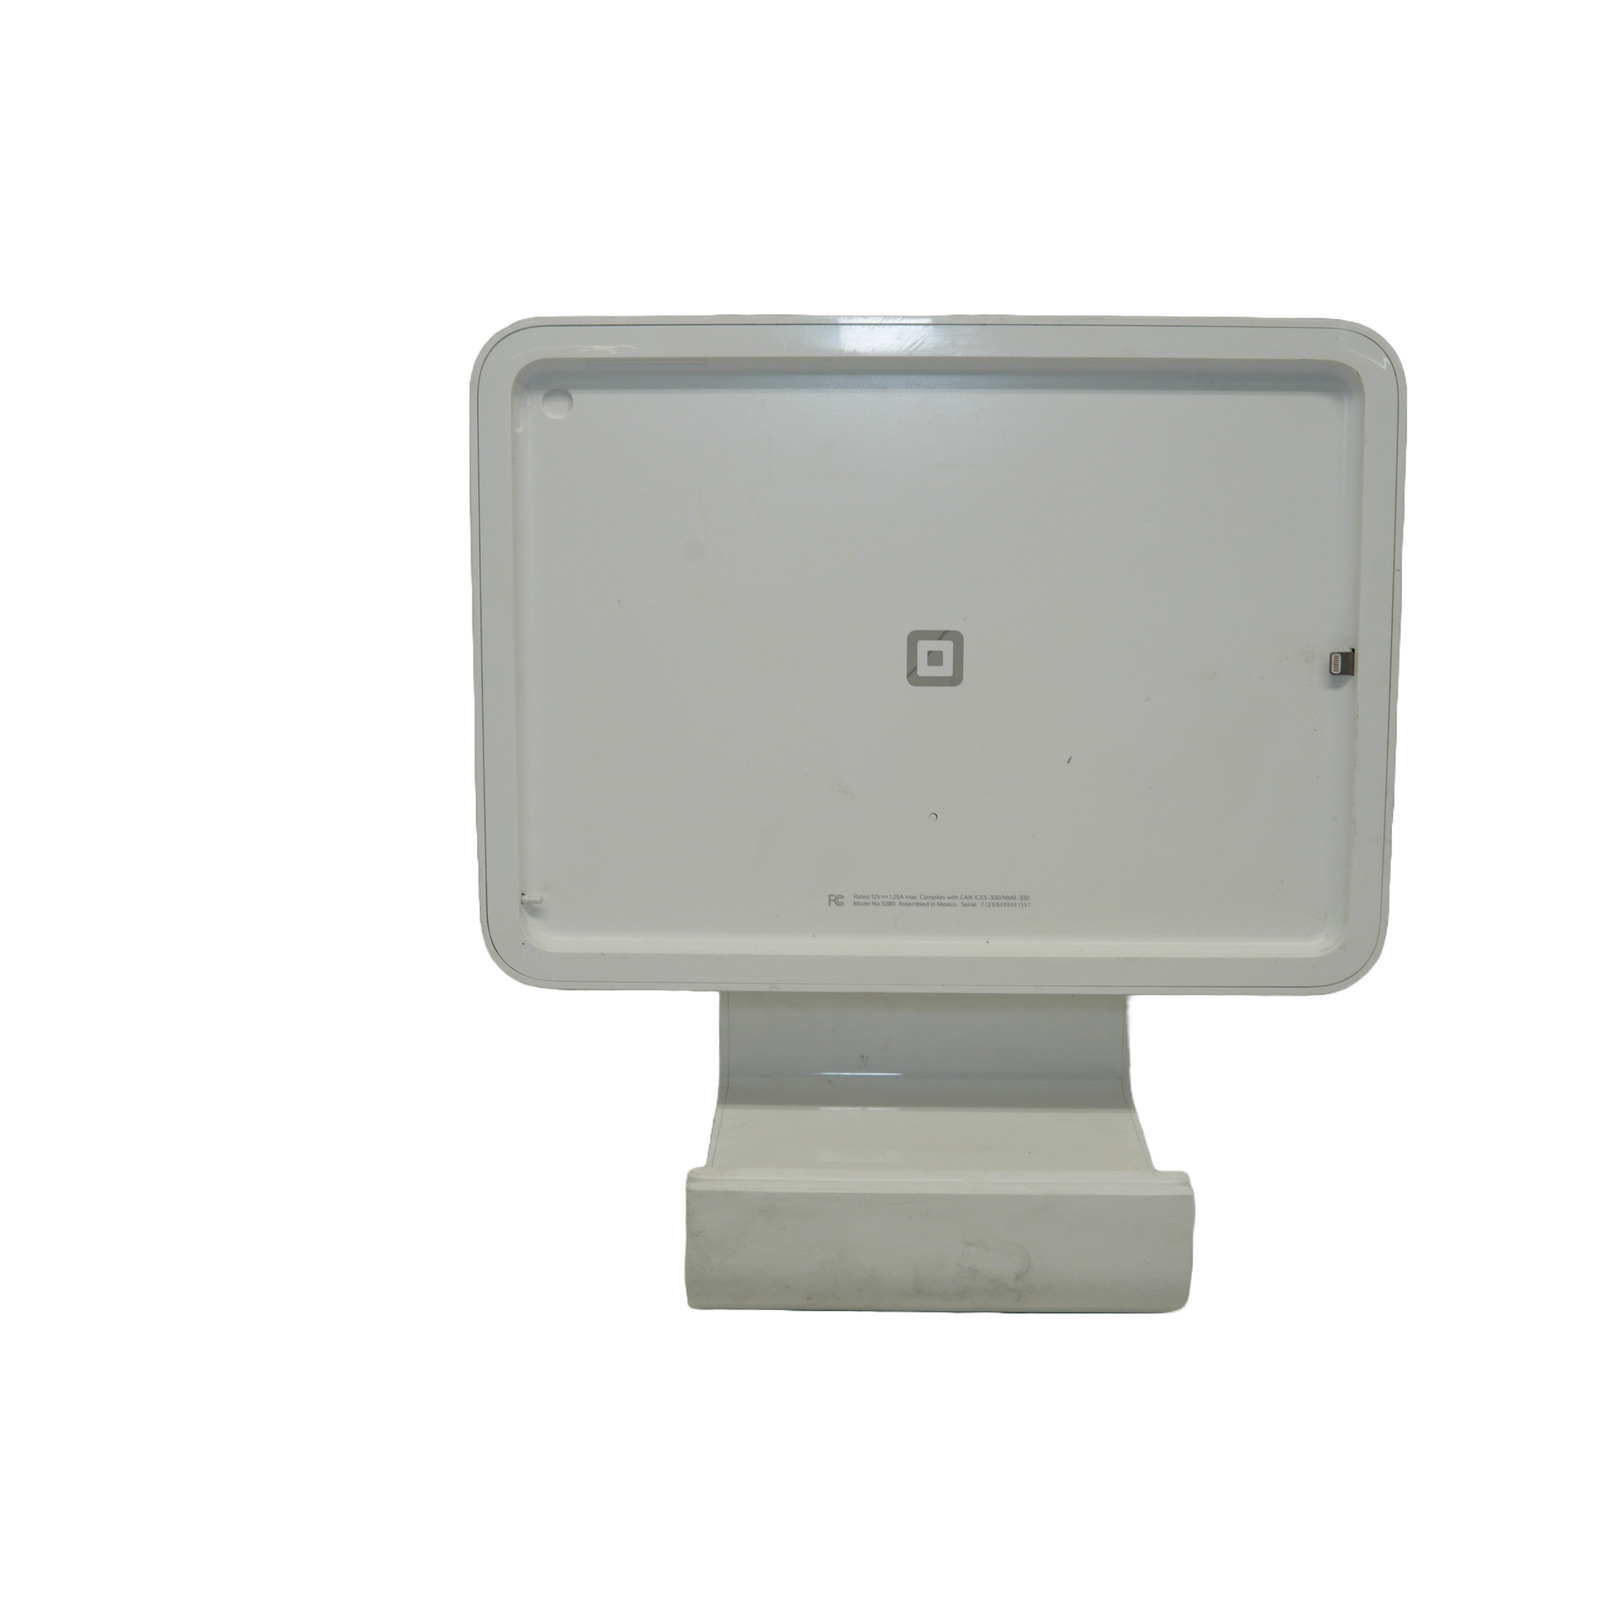 Square Dock Stand Model S089 for Apple iPad